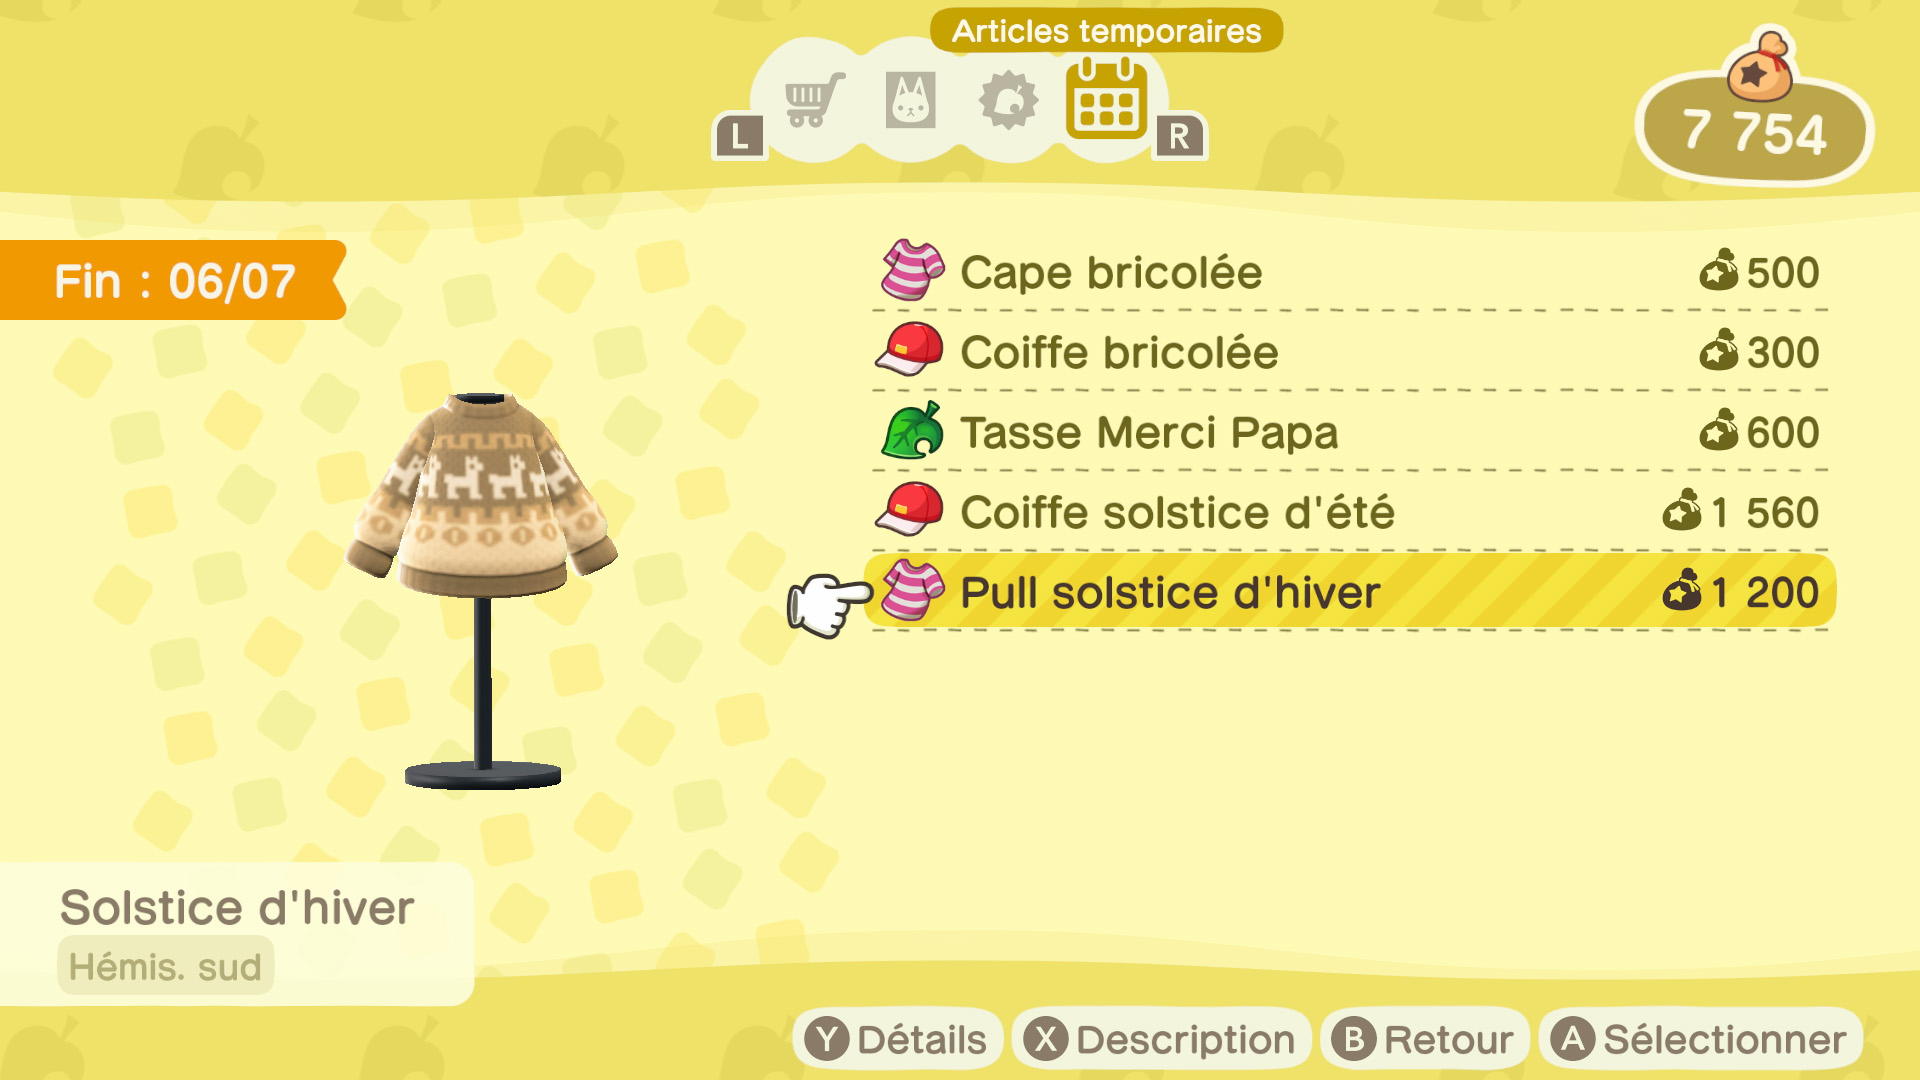 Articles temporaires du nook shopping - animal crossing new horizons